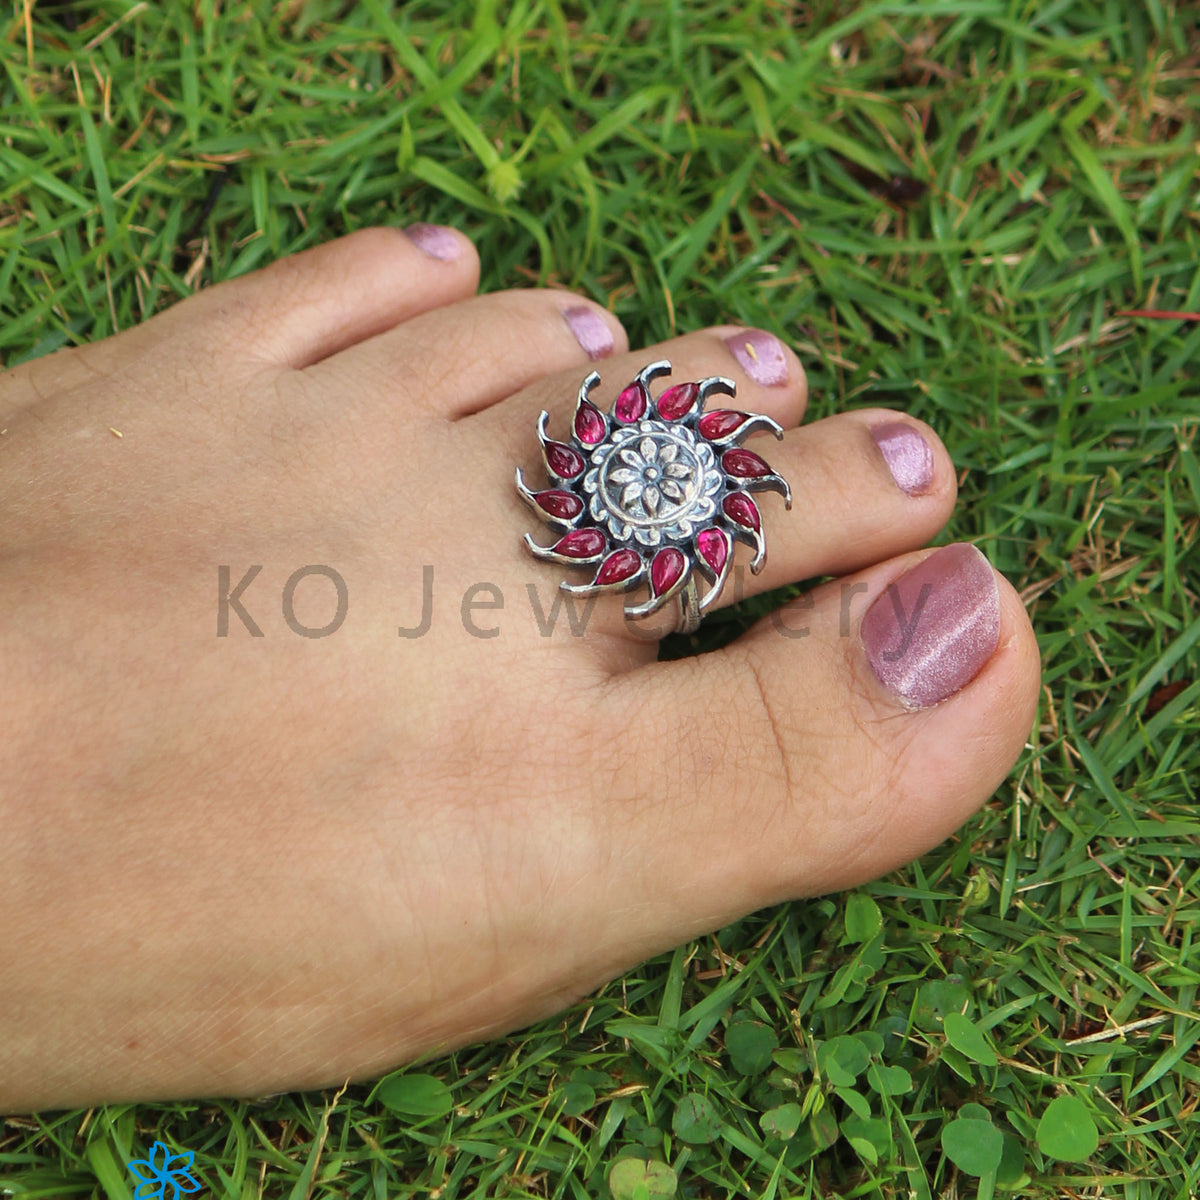 Toe Rings: A Step into Tradition and Style